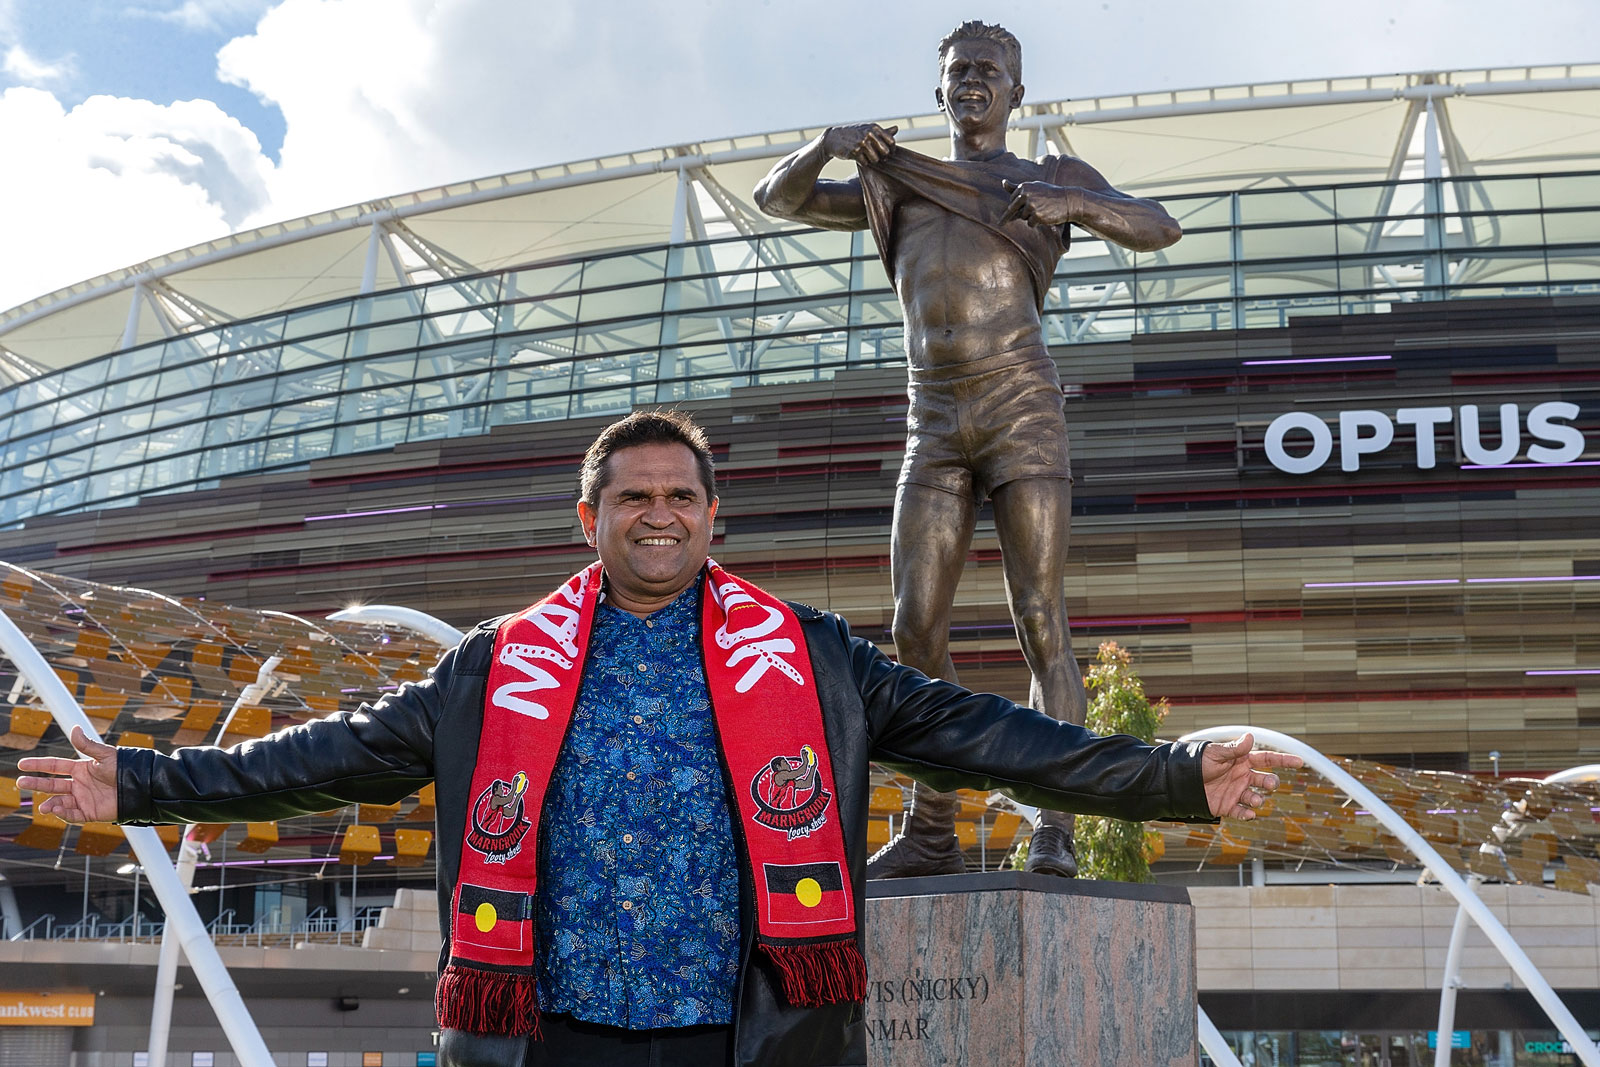 Nicky Winmar after the unveiling of the Nicky Winmar statue at Optus Stadium on 6 July 2019 in Perth, Australia.